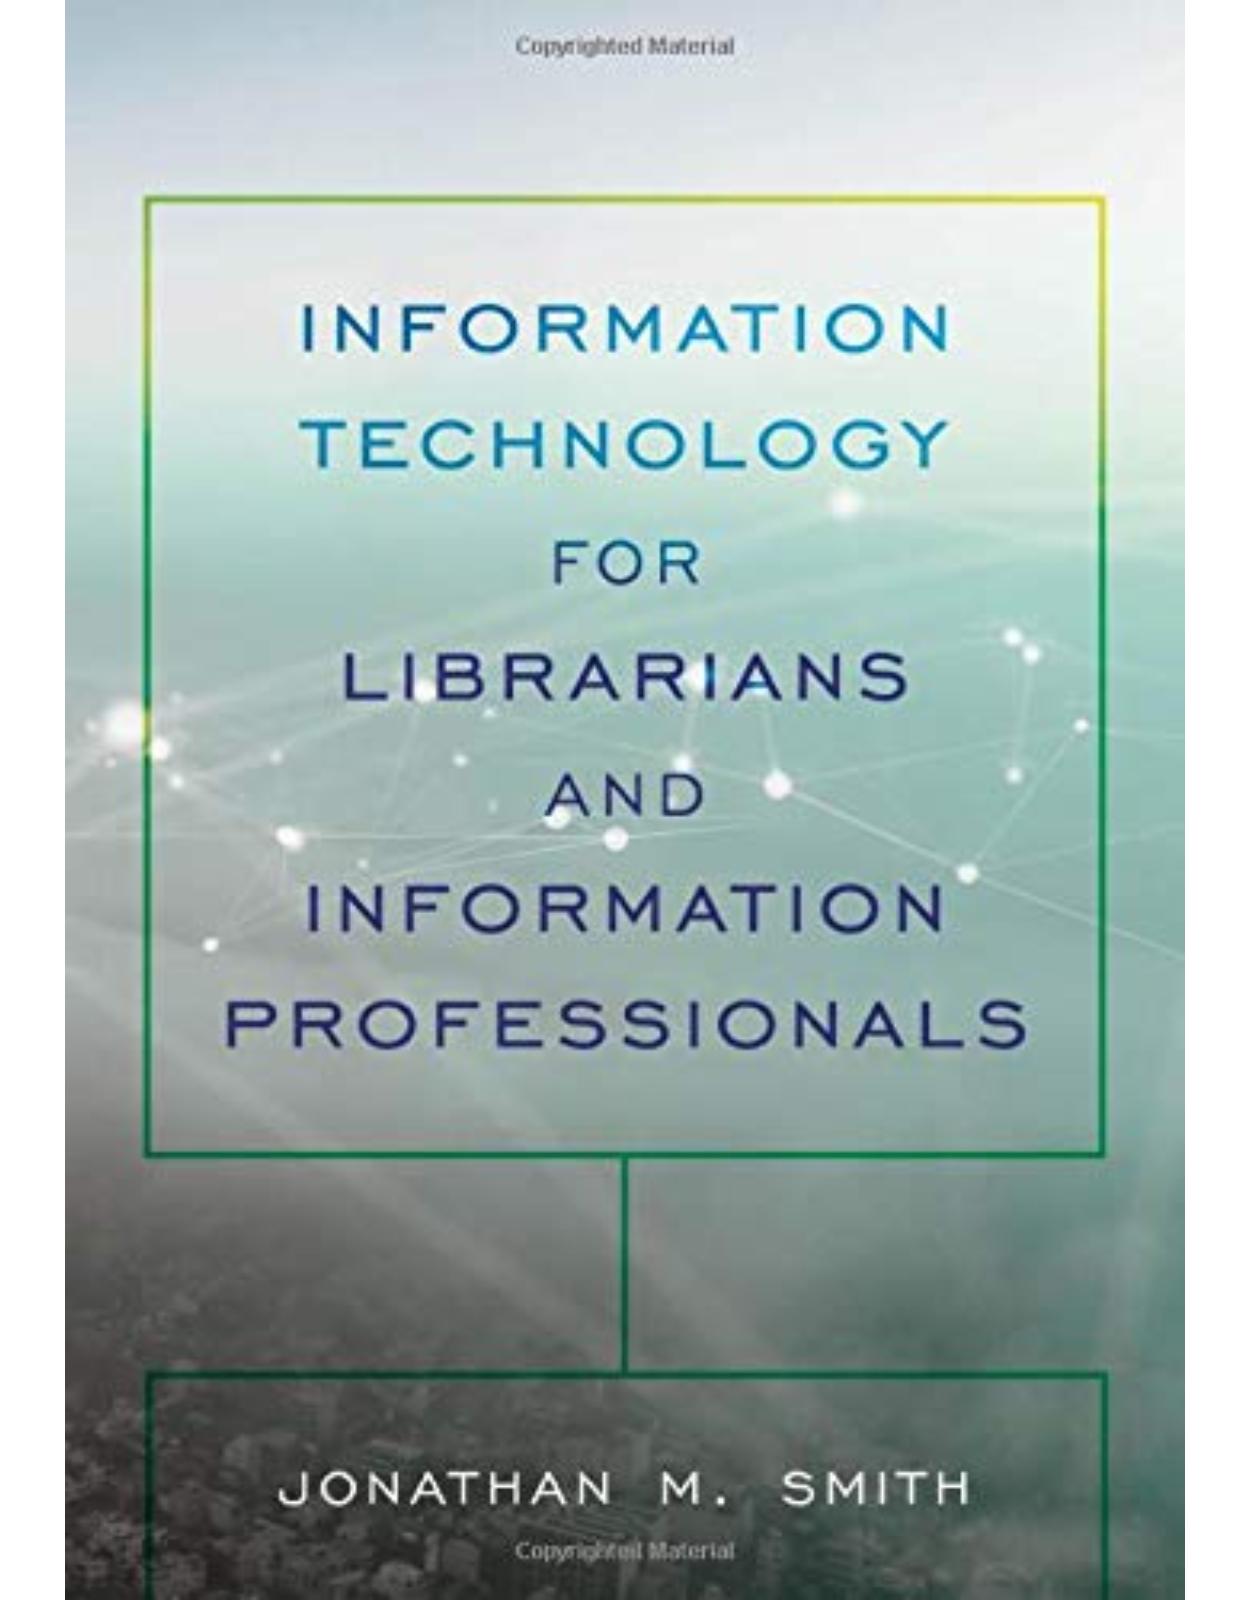 Information Technology for Librarians and Information Professionals (LITA Guides)